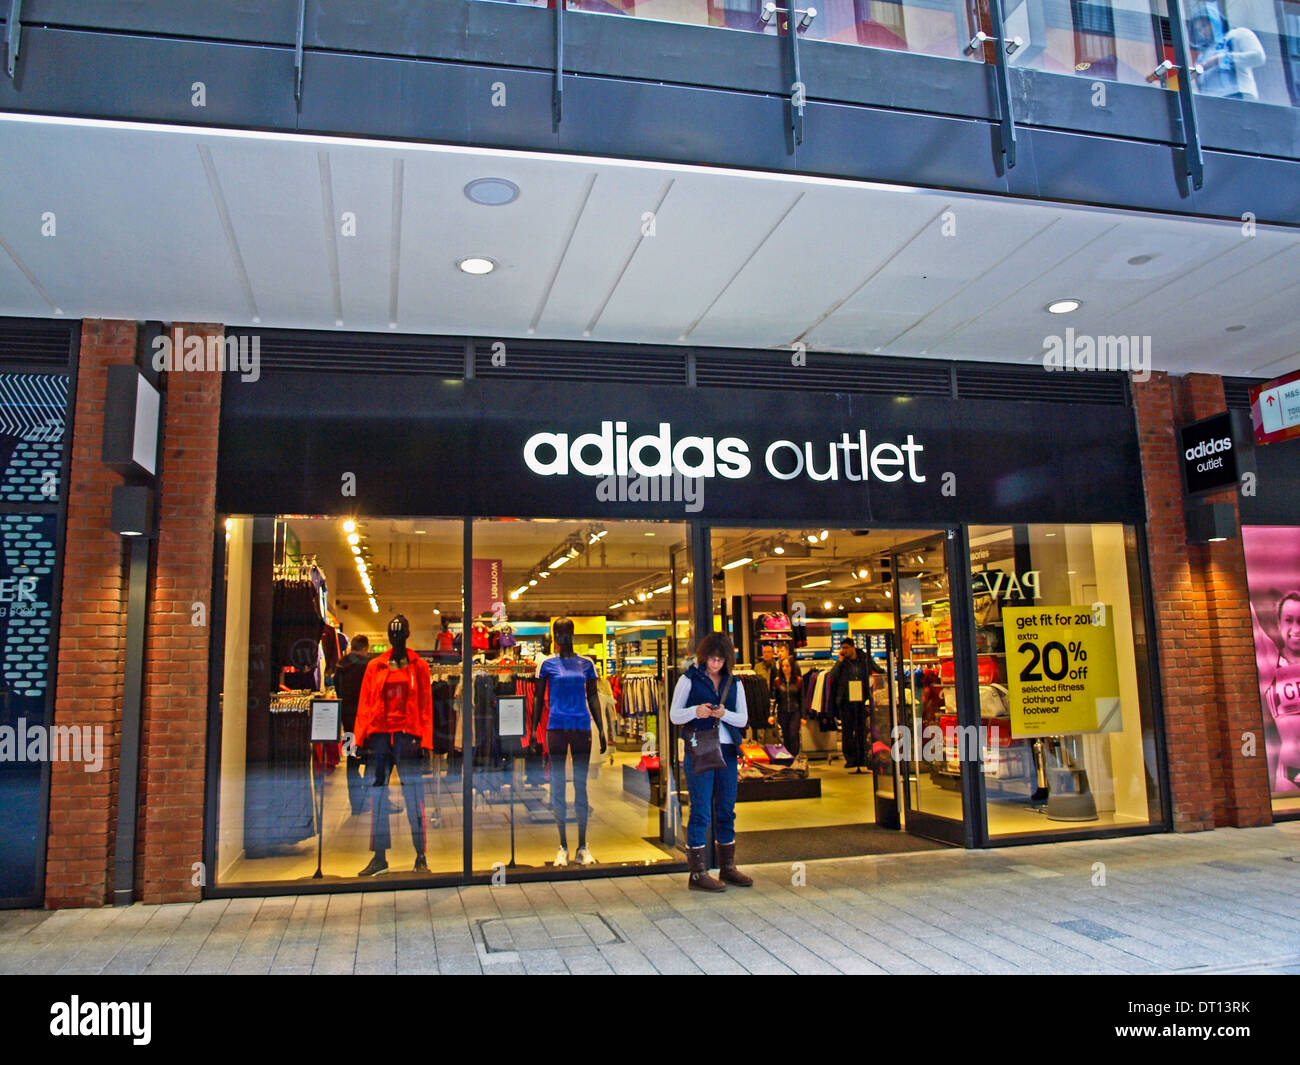 adidas outlet at